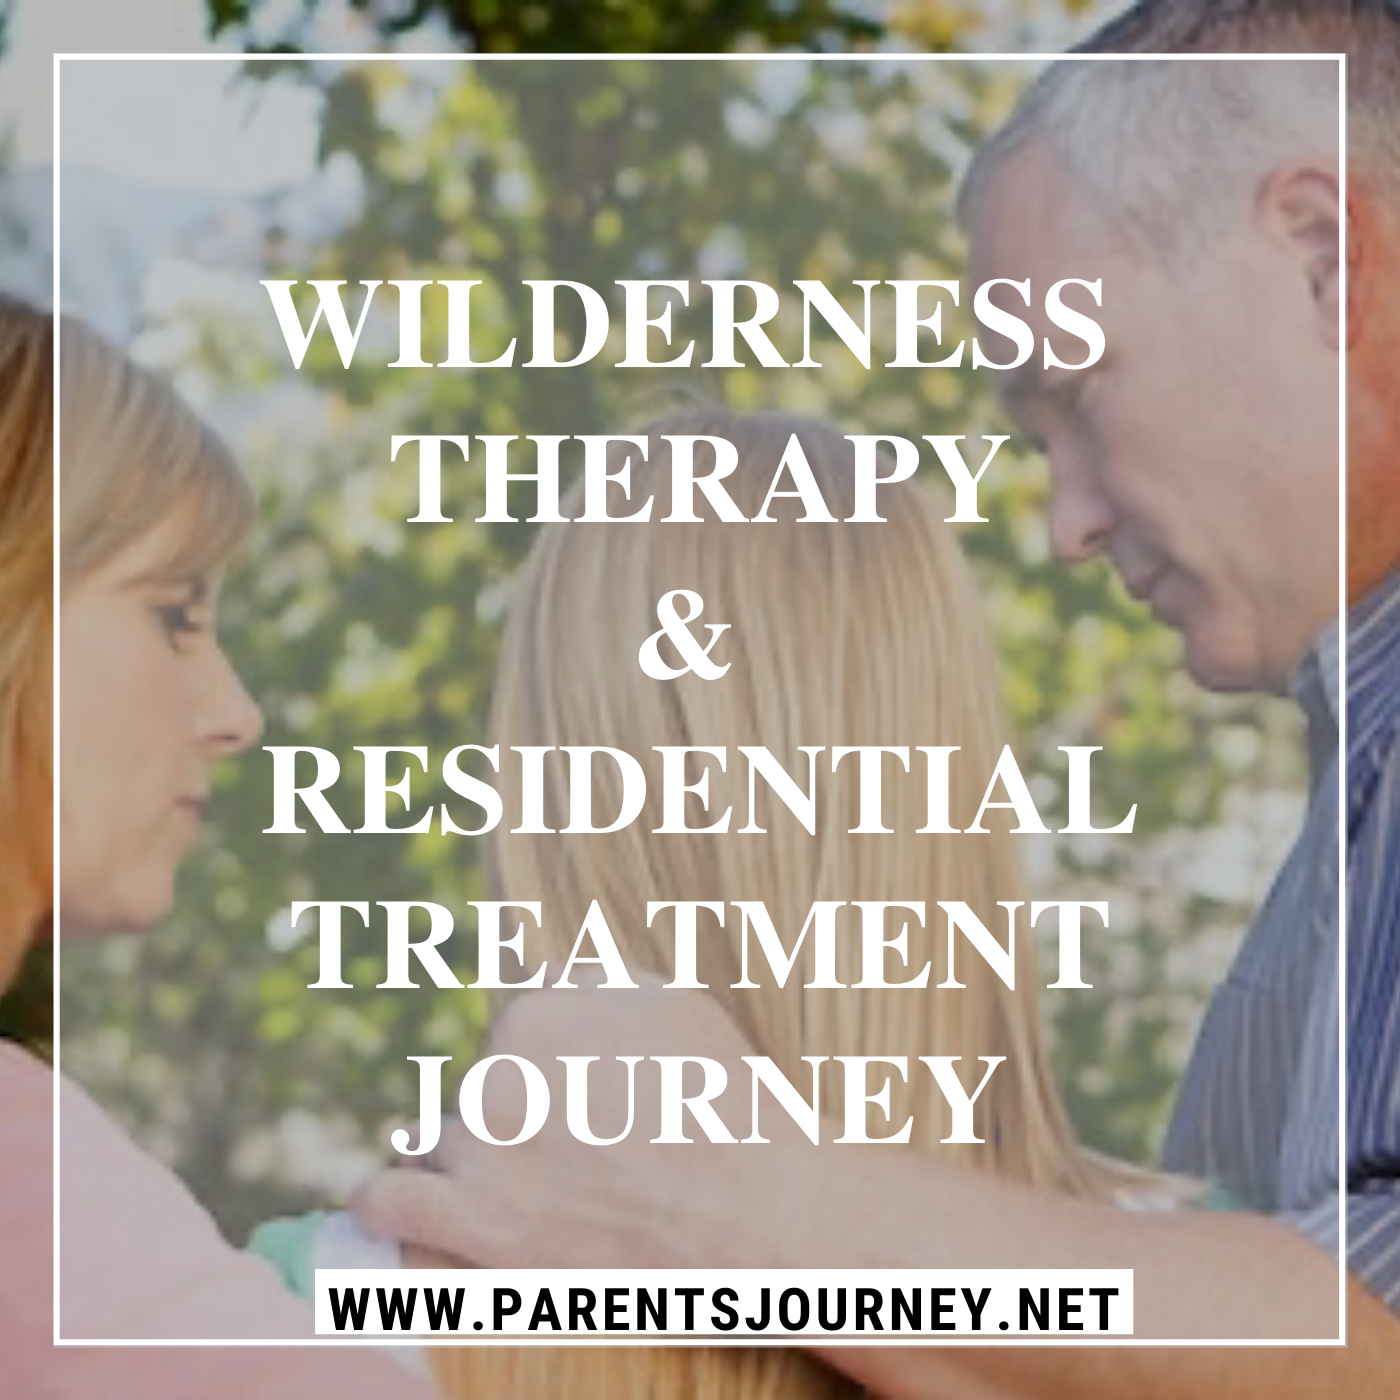 Wilderness Therapy & Residential Treatment Journey